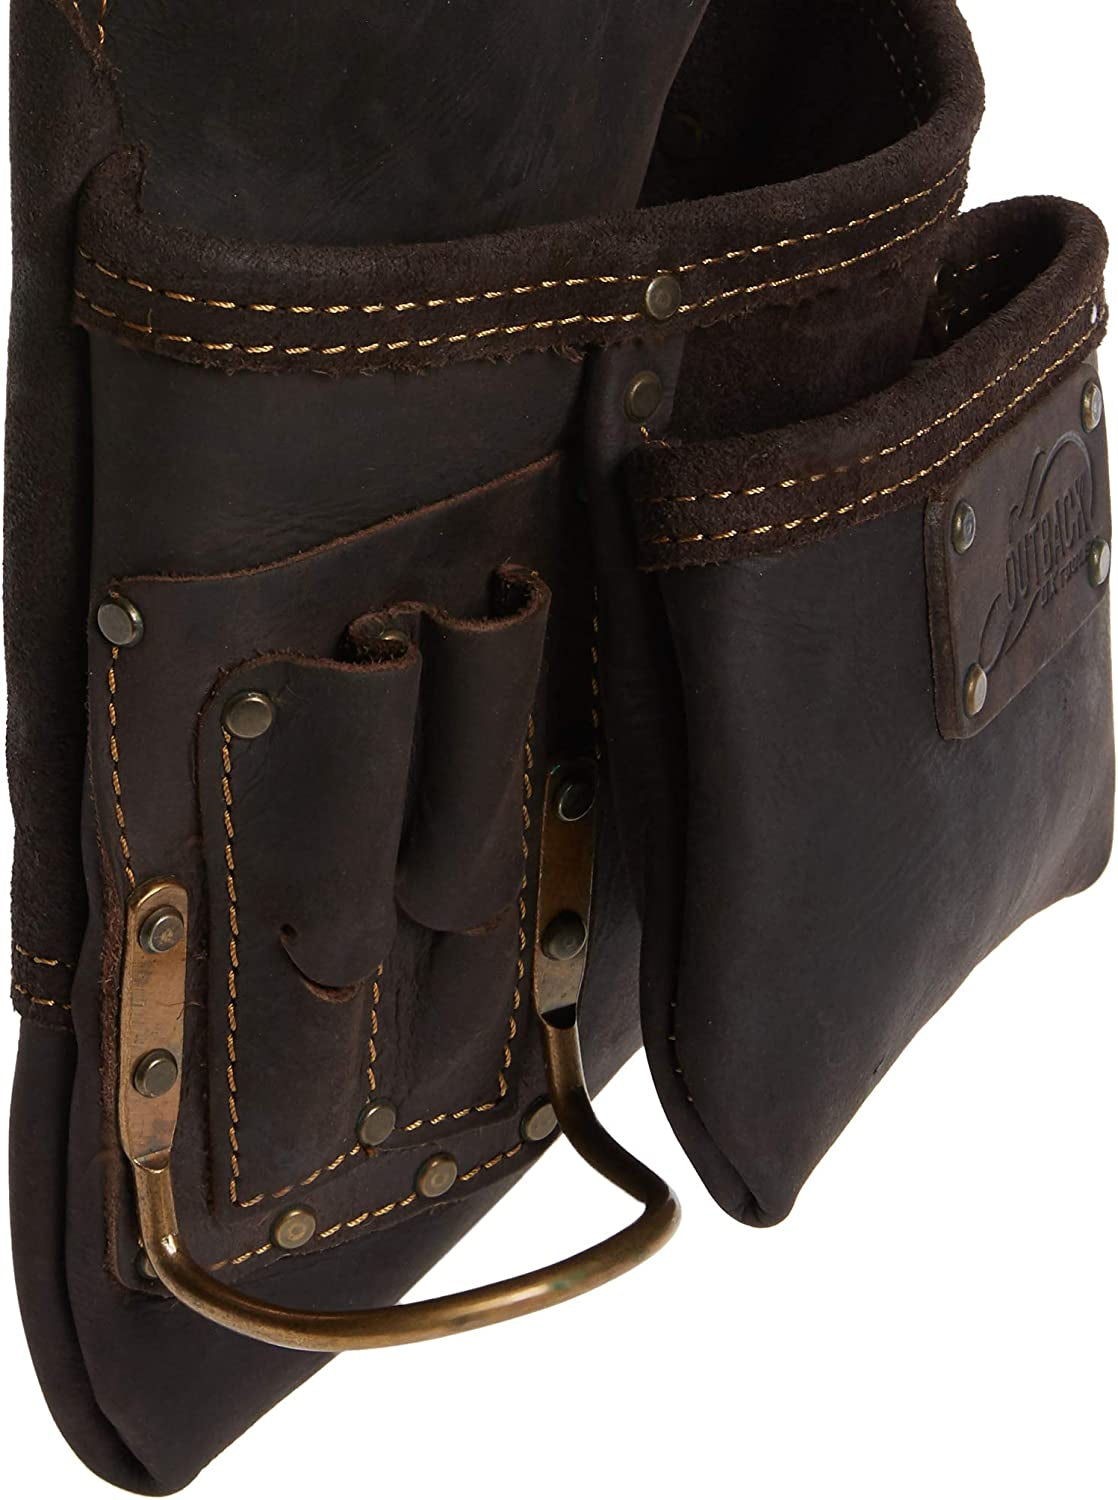 OX-P263701 Pro Oil Tanned Leather 10 Pocket Tool Pouch, 1 Pack , Blue